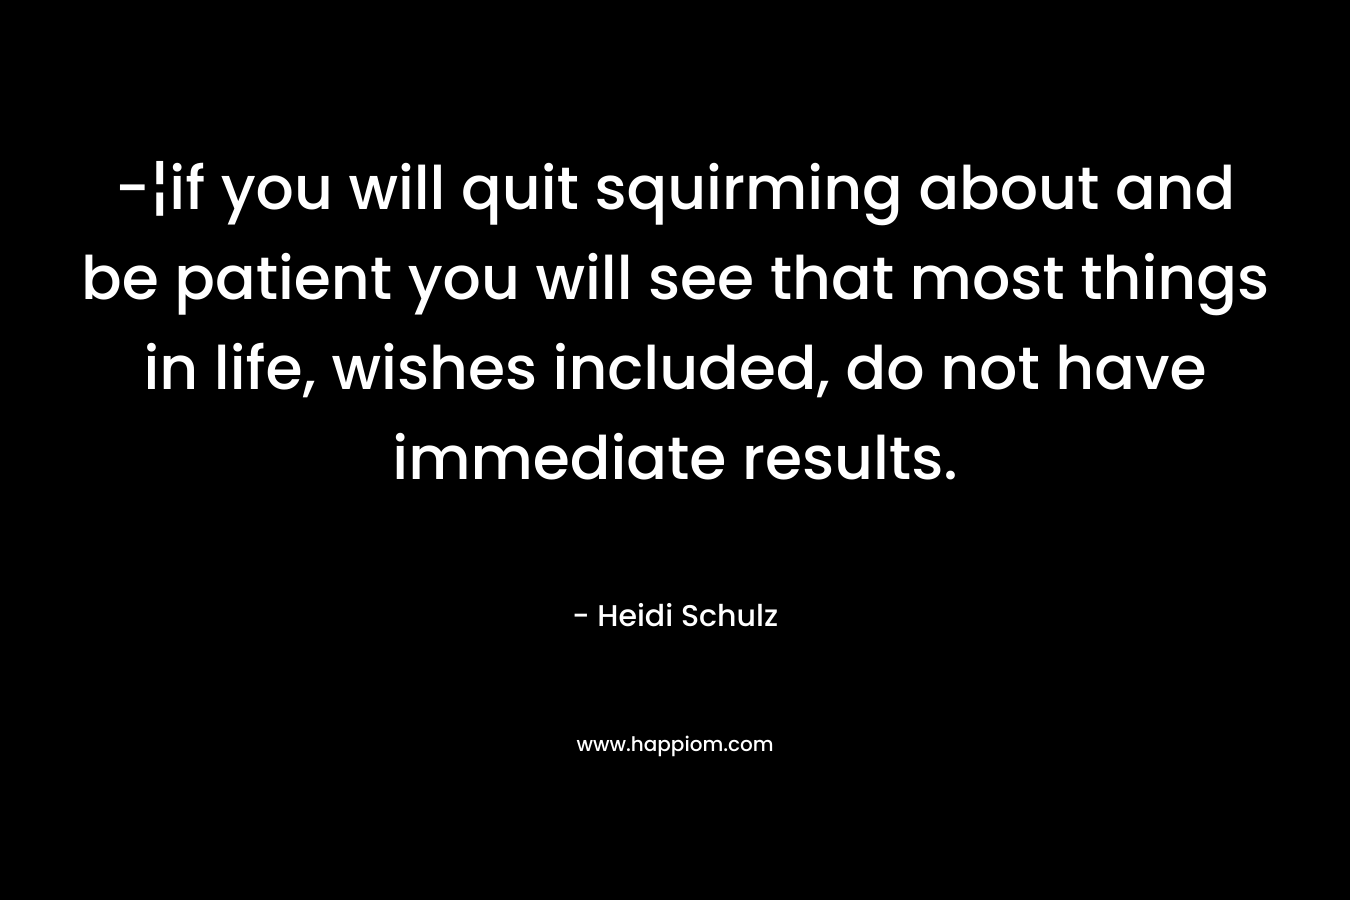 -¦if you will quit squirming about and be patient you will see that most things in life, wishes included, do not have immediate results. – Heidi Schulz